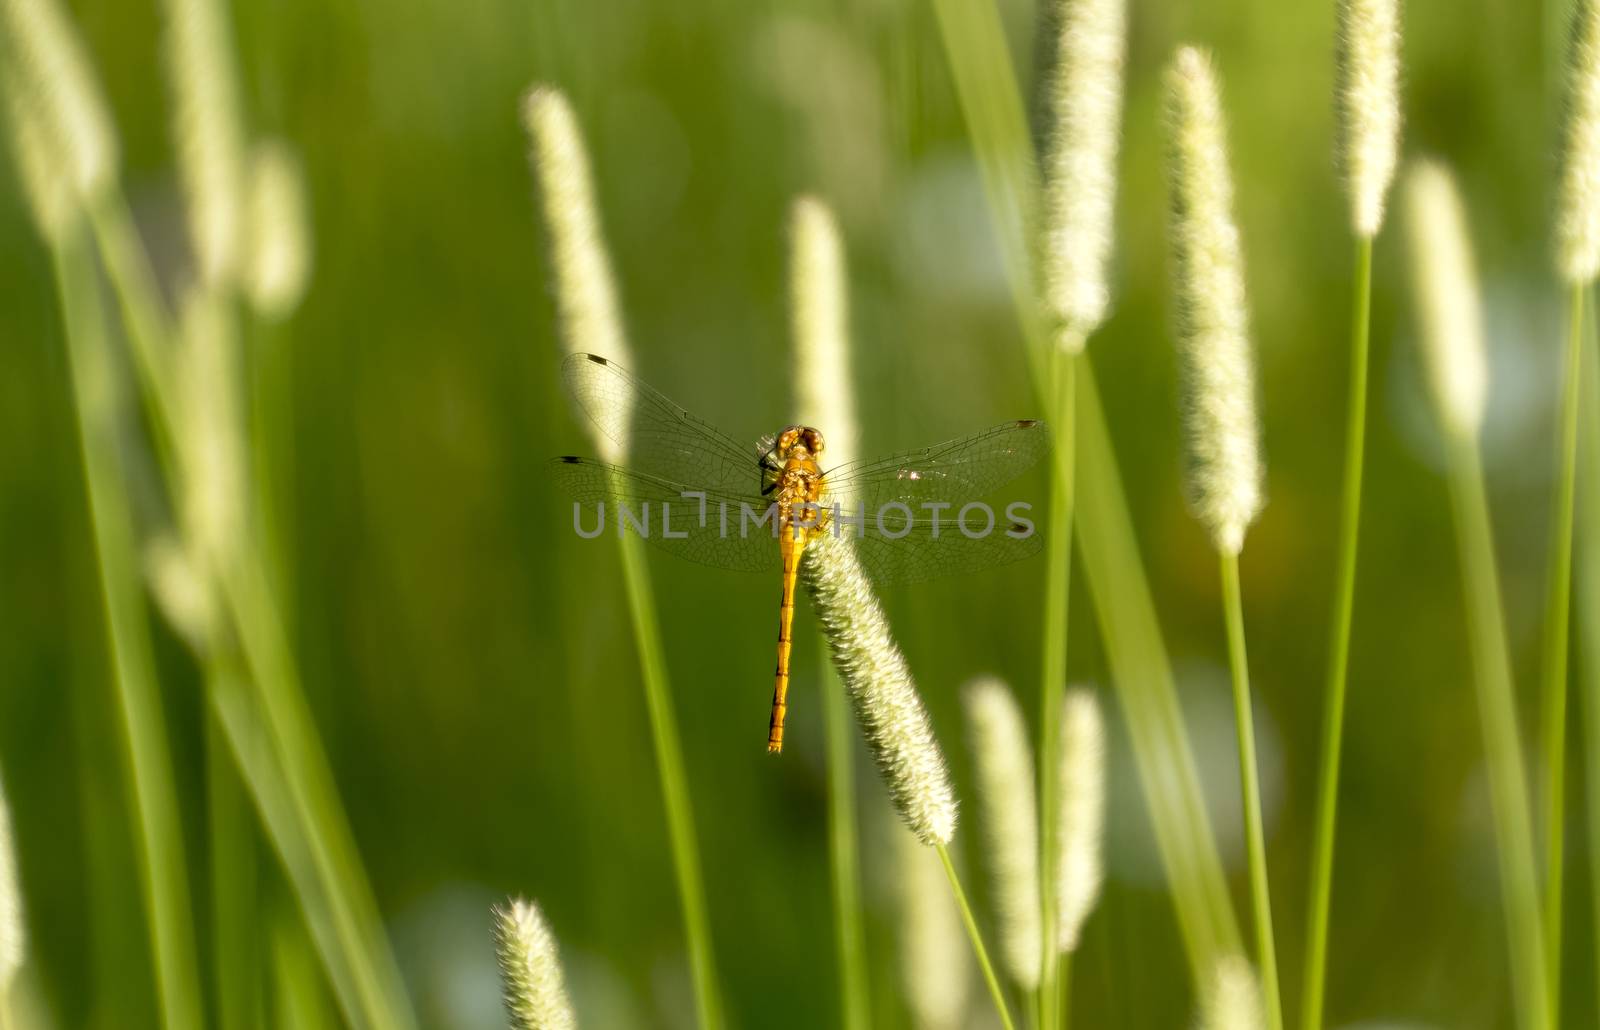 Foxtail dragonfly by bkenney5@gmail.com